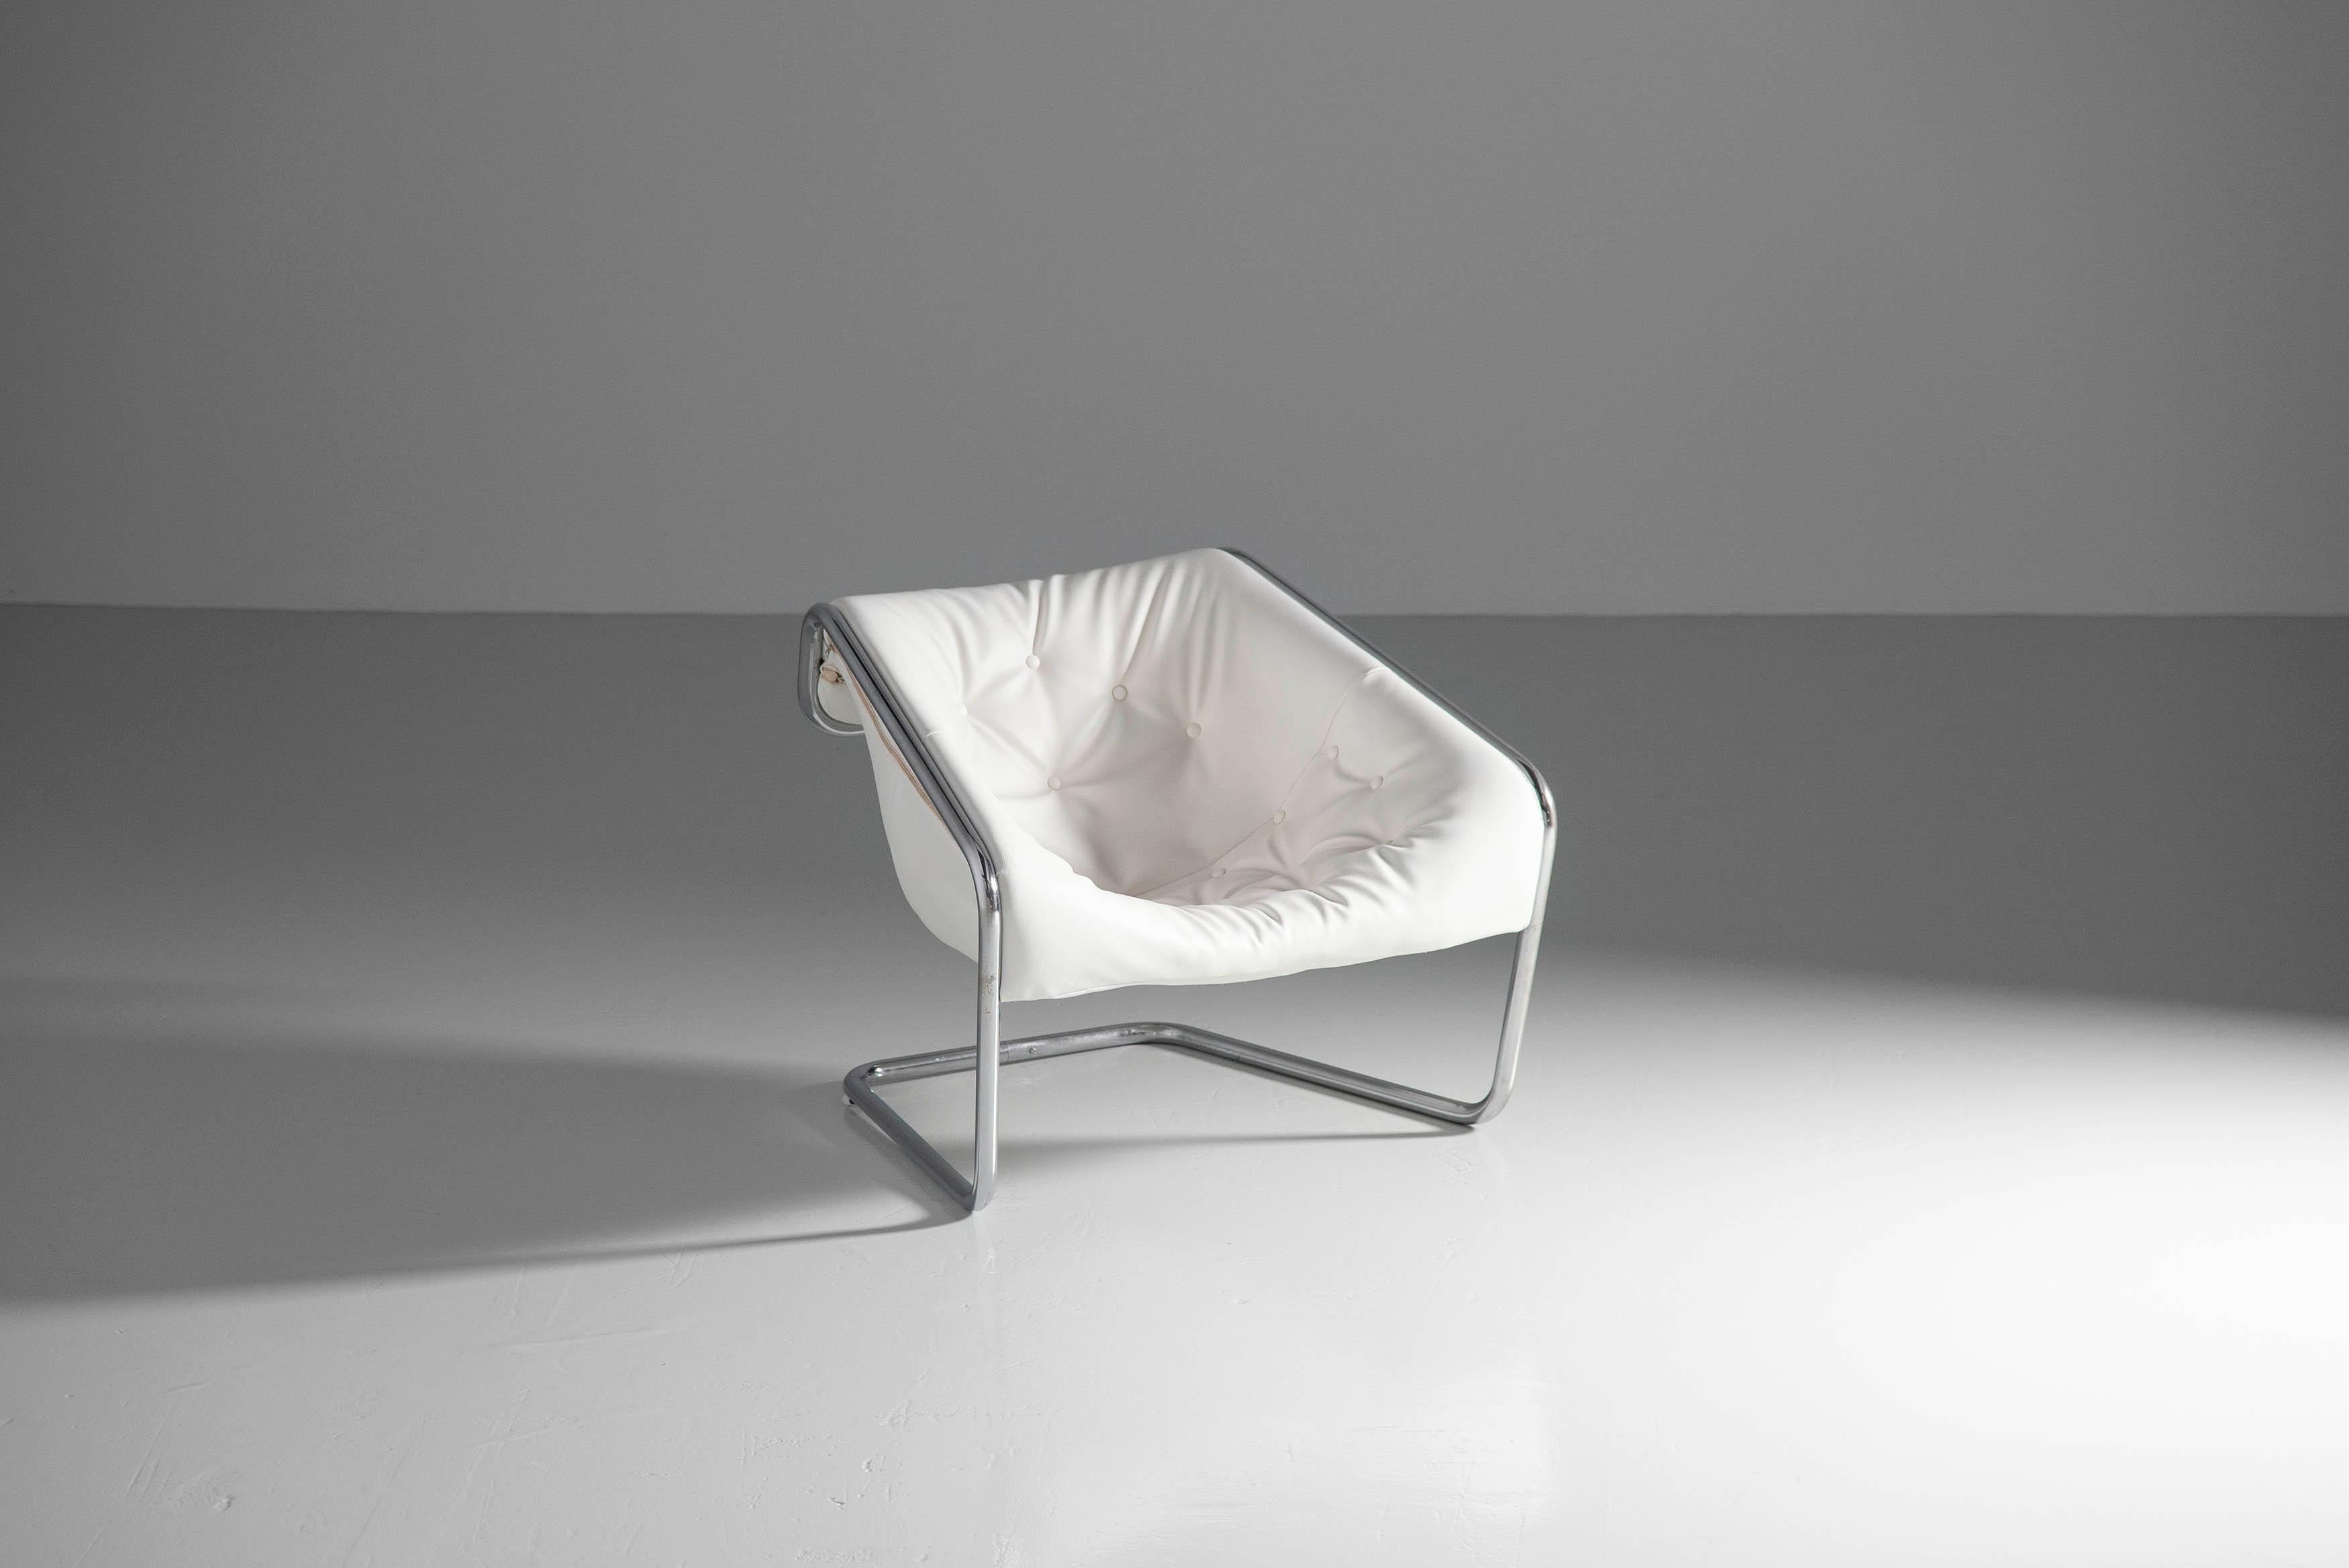 Comfortable so called 'Boxer' lounge chair designed by Kwok Hoi Chan and manufactured by Steiner, France 1971. The chair has a tubular chrome plated metal frame which is very strong and firm, and it supports a white seat in leatherette. The big seat